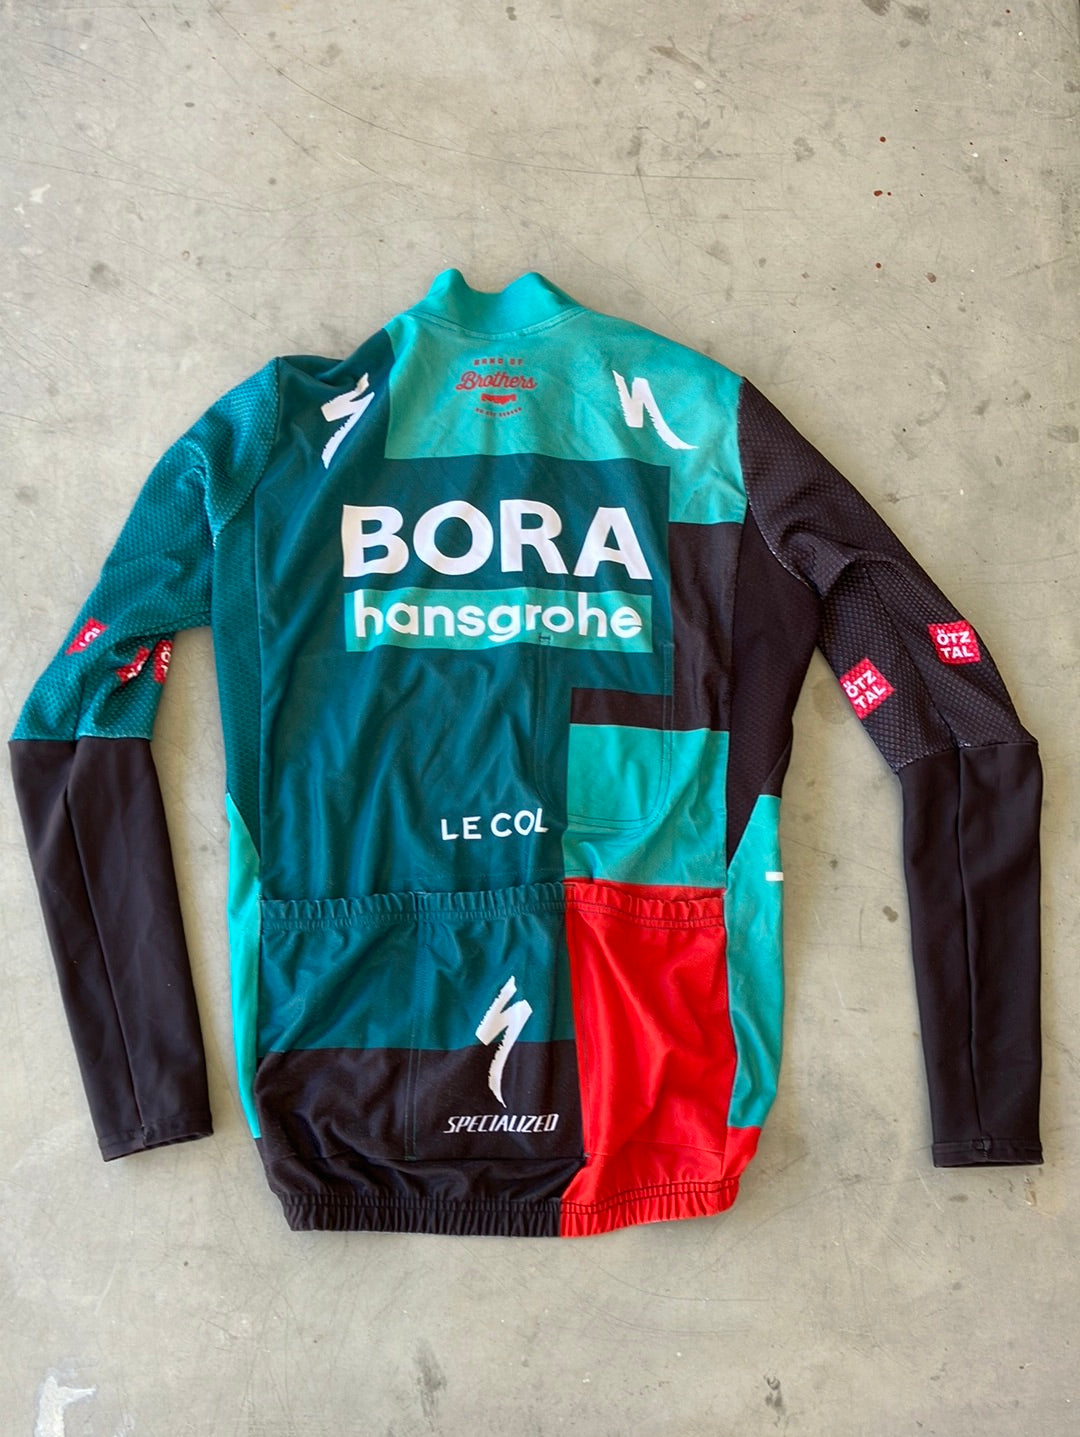 Aero Jersey Long Sleeve | Le Col | Bora Hansgrohe | Pro-Issued Cycling Kit